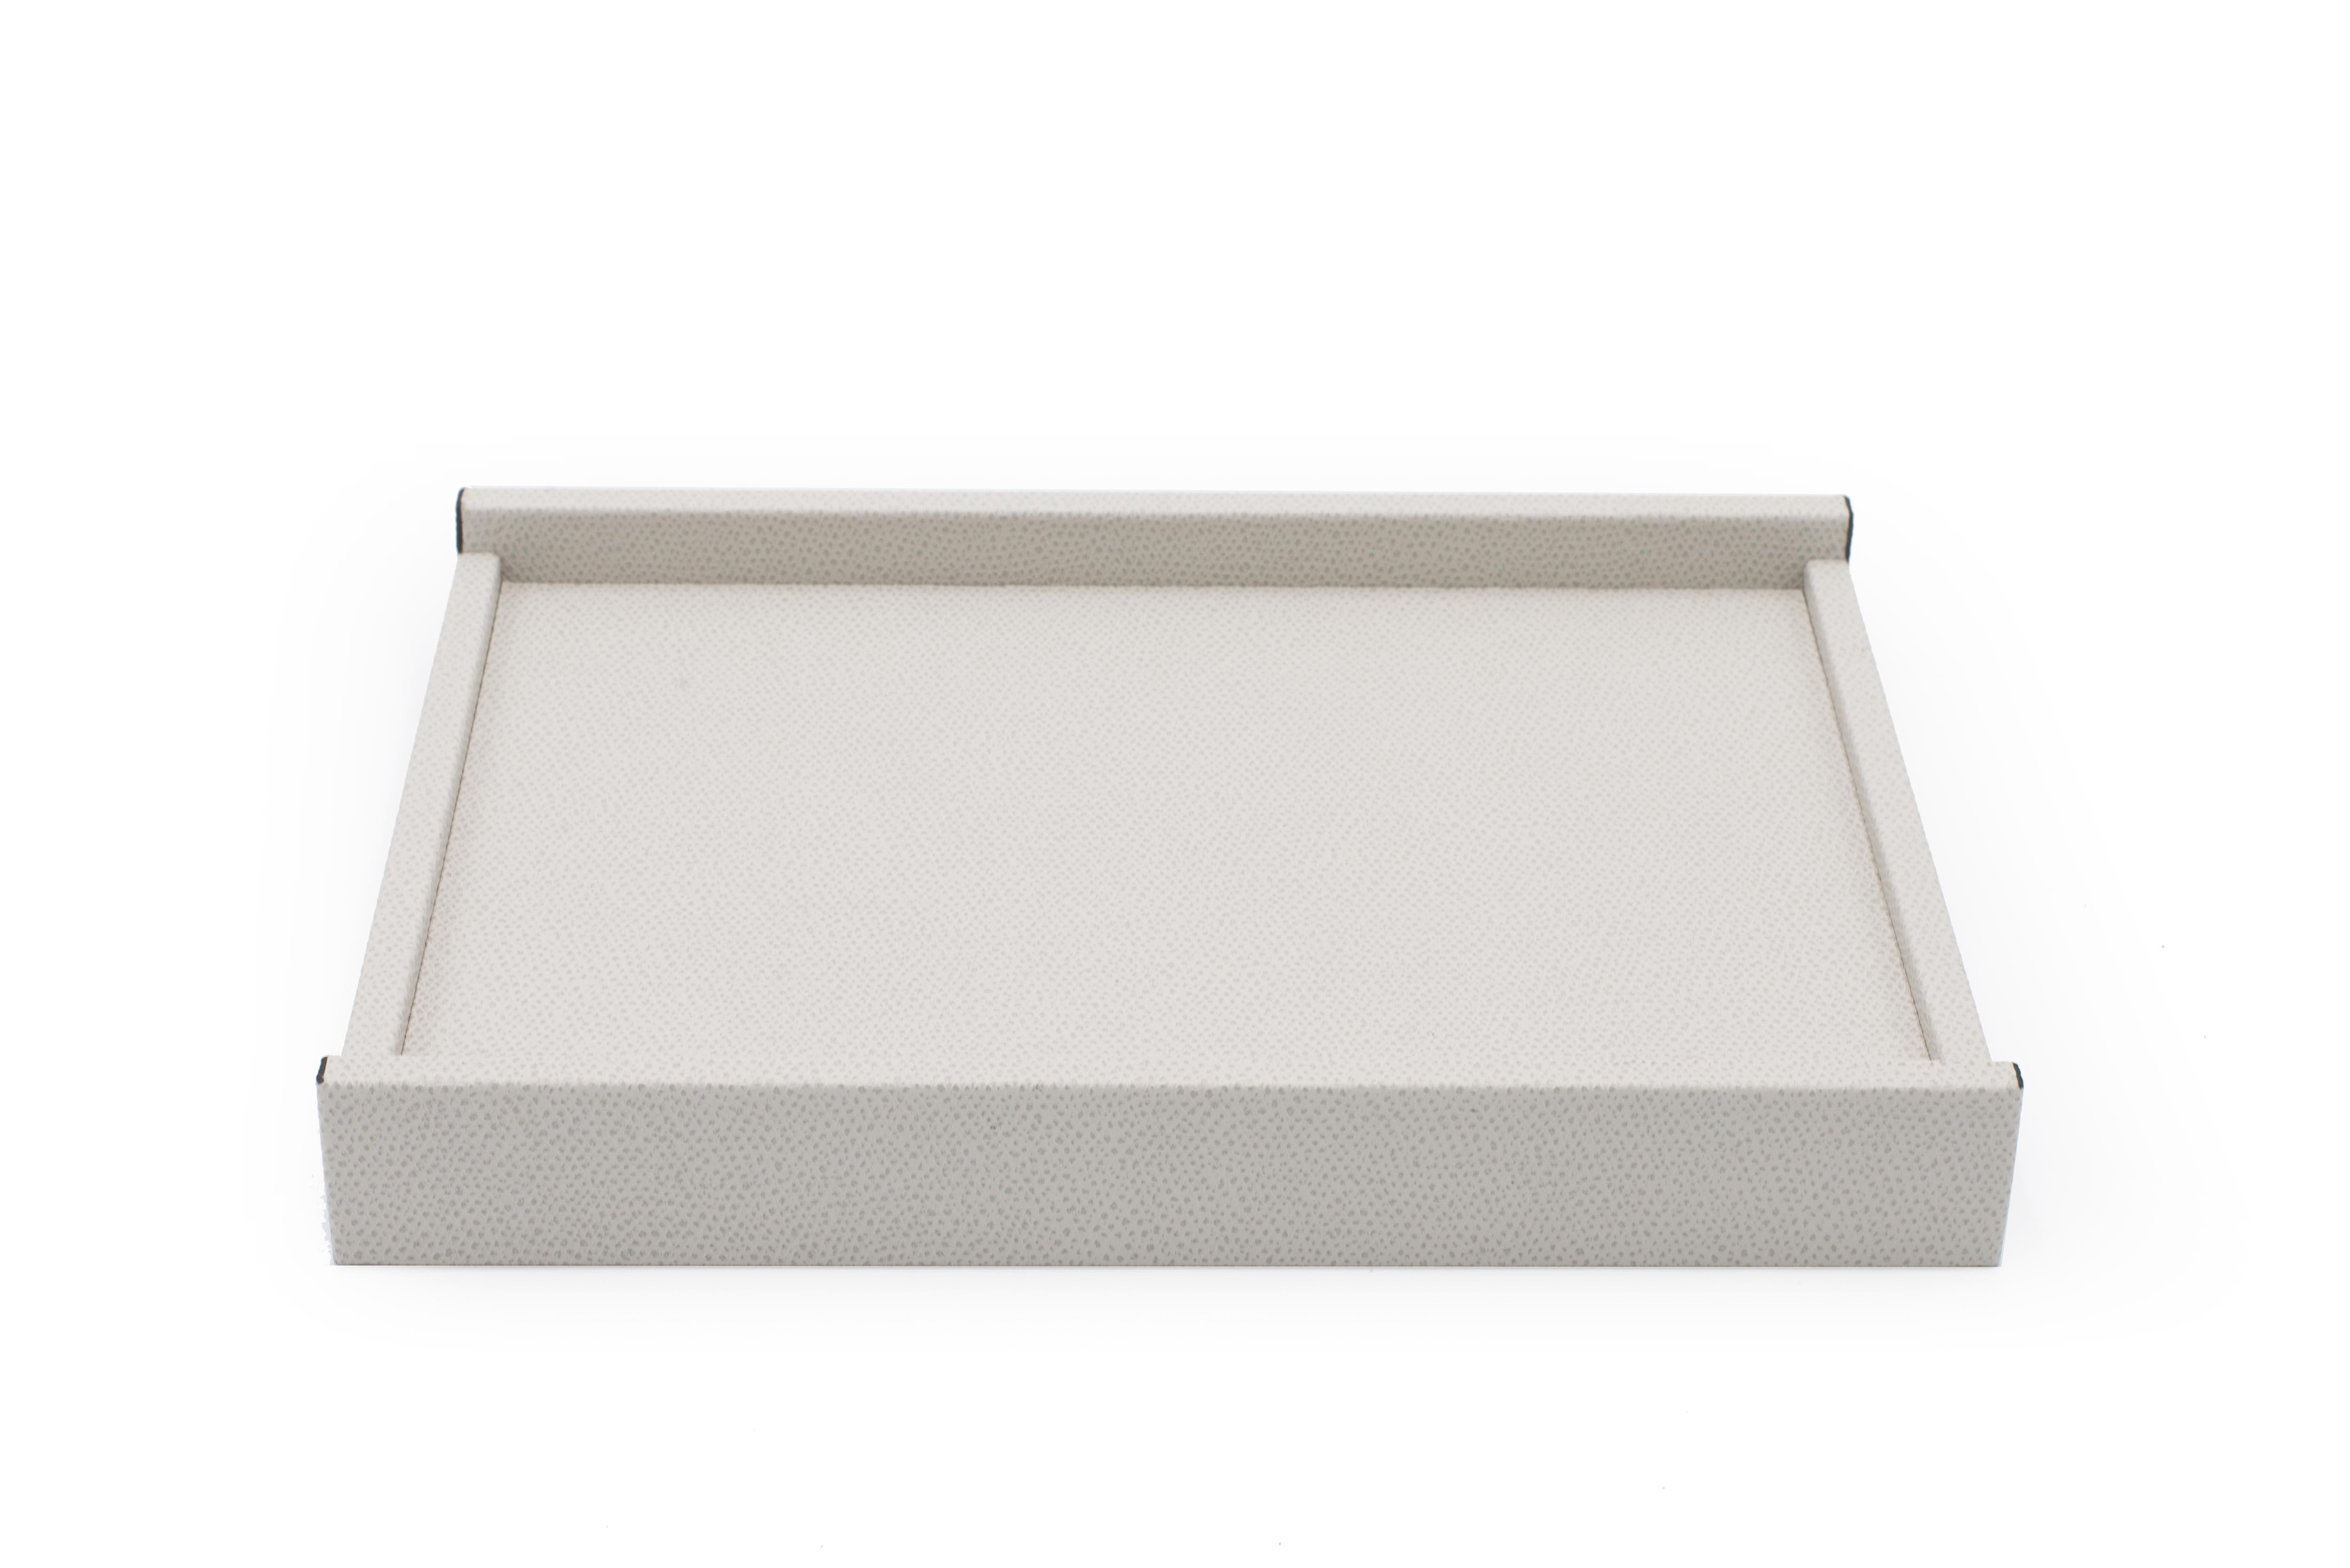 Contemporary rectangular light gray valet tray with two low sides and two taller sides (Made in Italy).